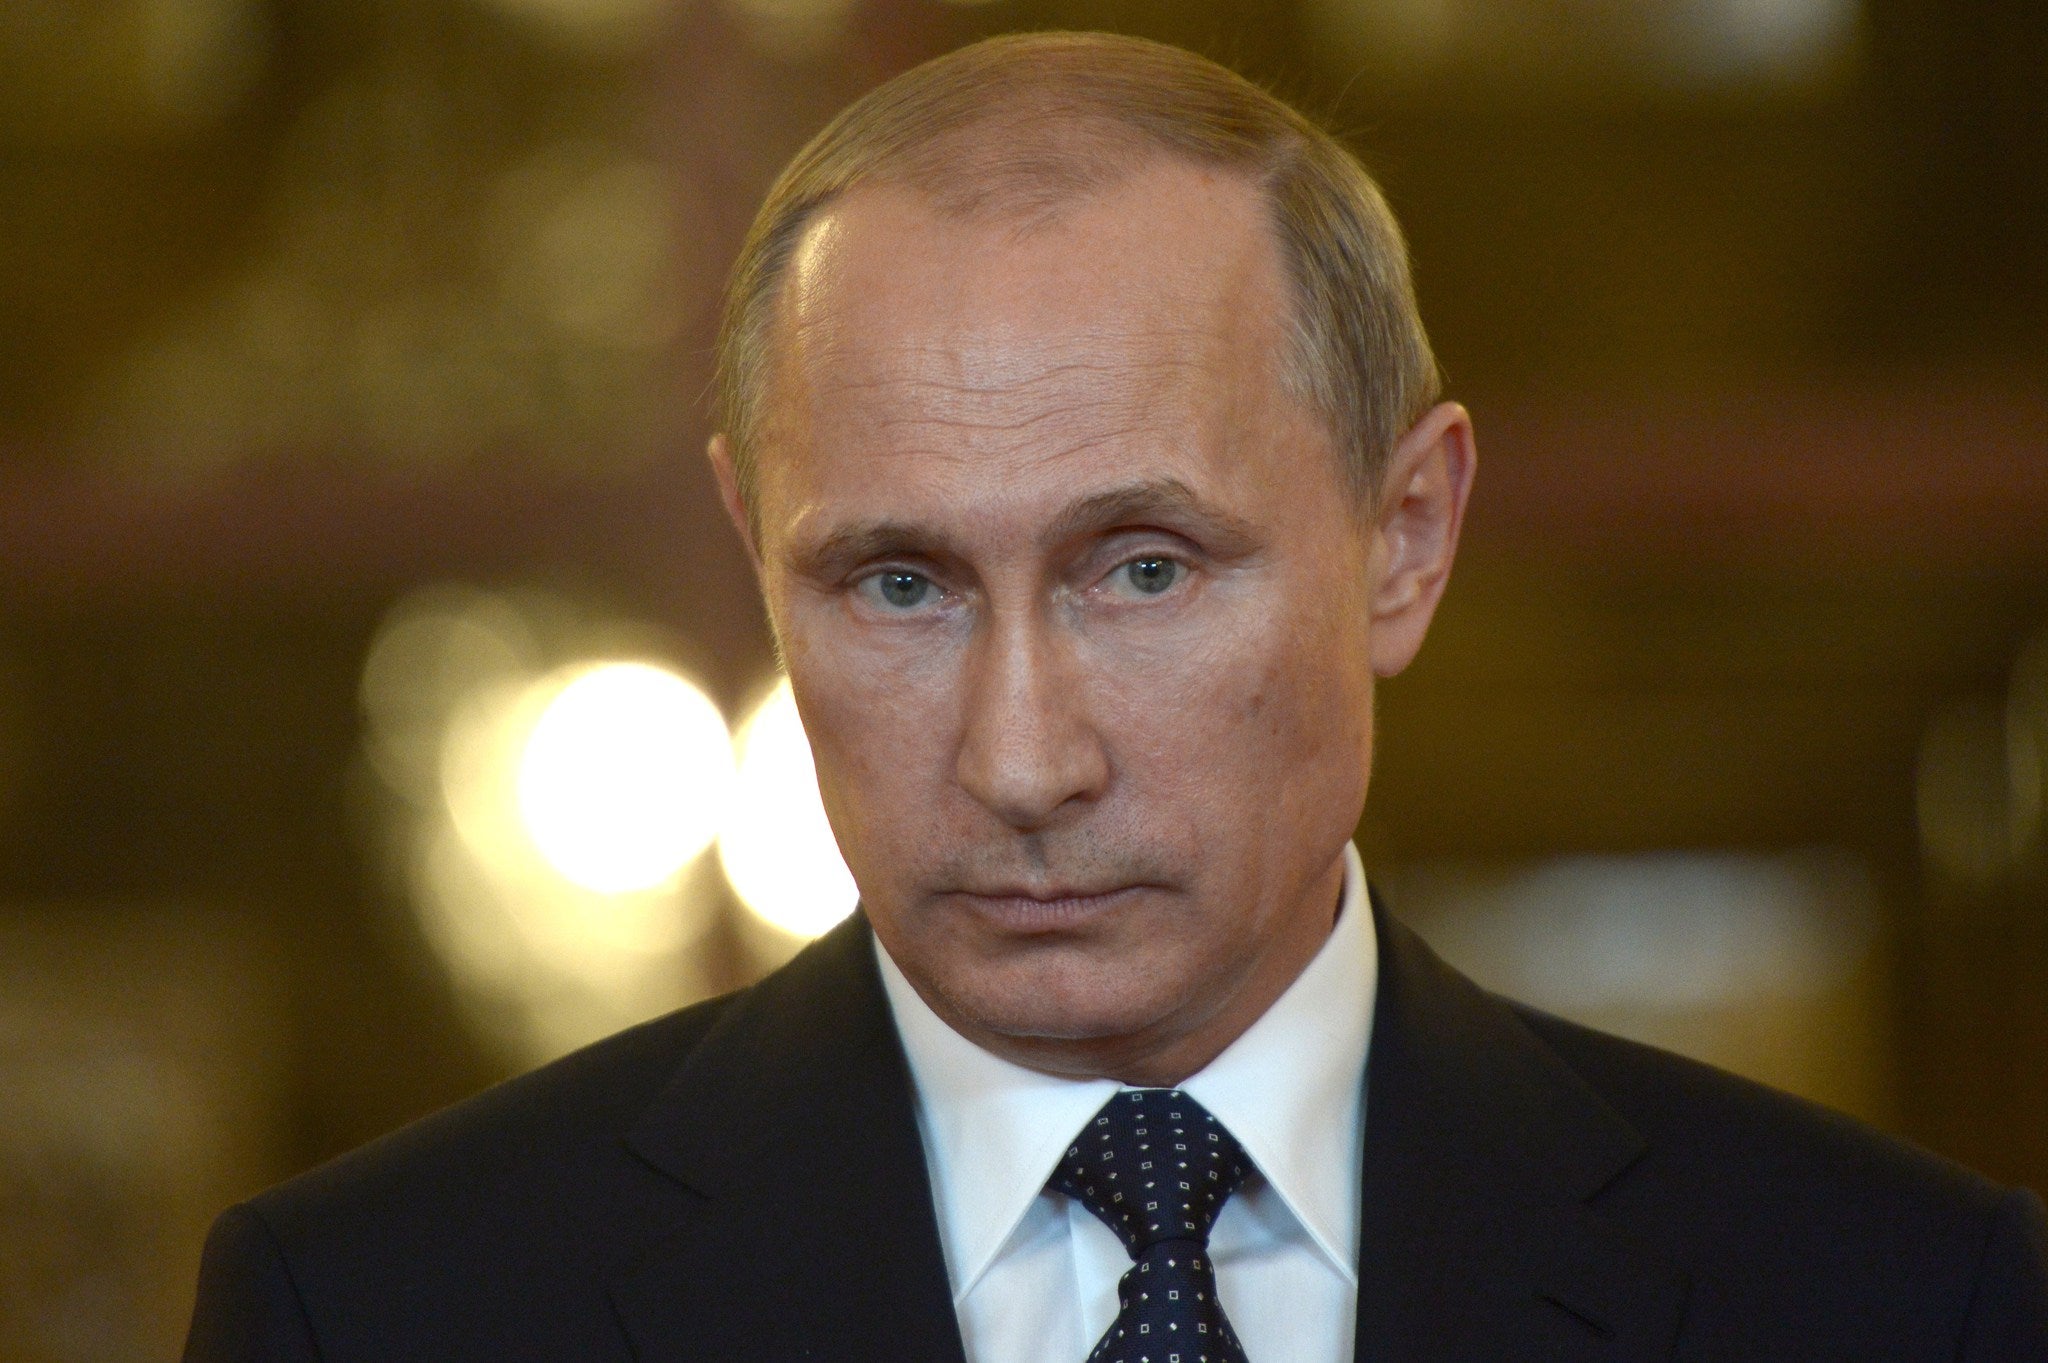 Russian President Putin has said that the tragedy of MH17 should not be used for "mercenary objectives"